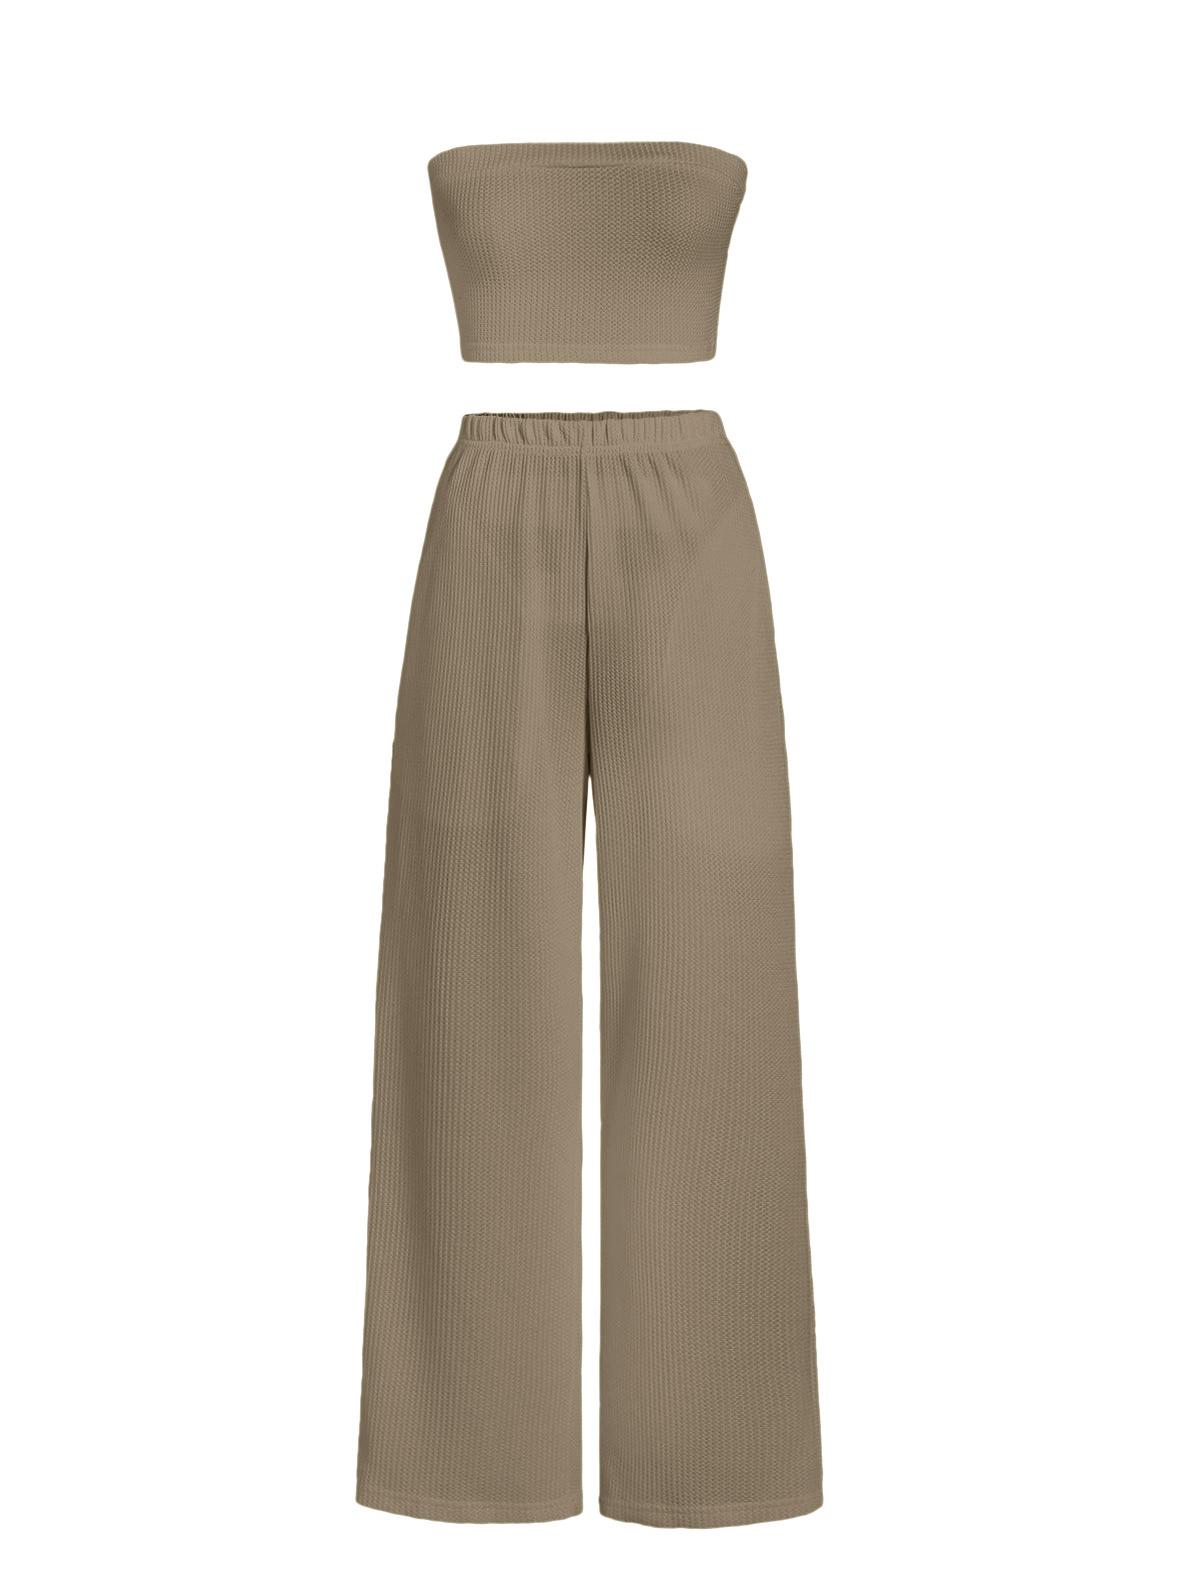 Solid Color Textured Tube Crop Top and Pockets Pants Set L Deep coffee